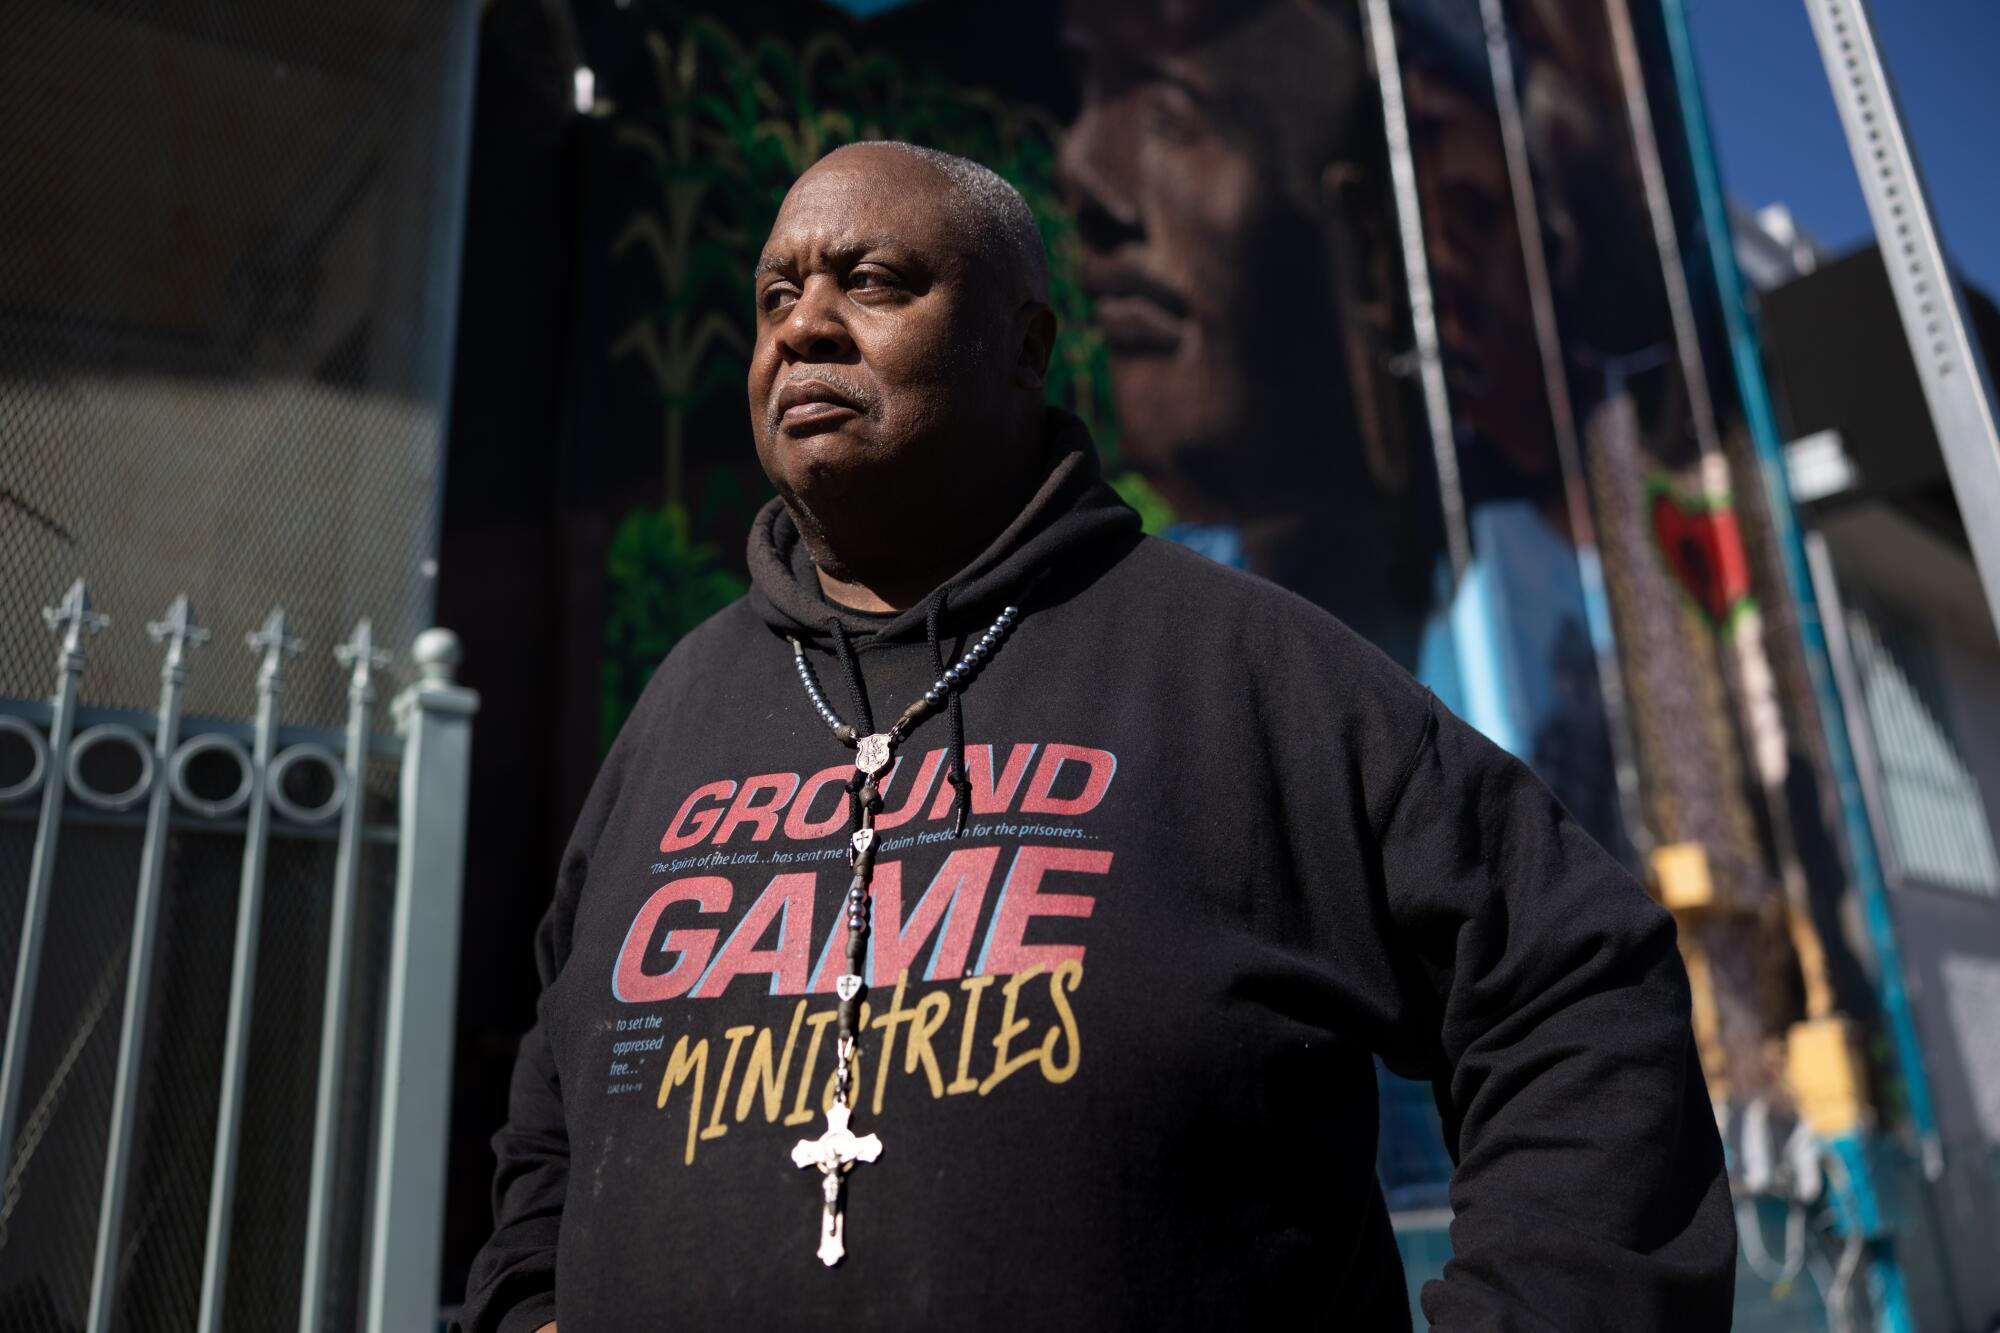 A man wearing a cross and a black hoodie reading "Ground Game Ministries" stands in front of a mural after dark.